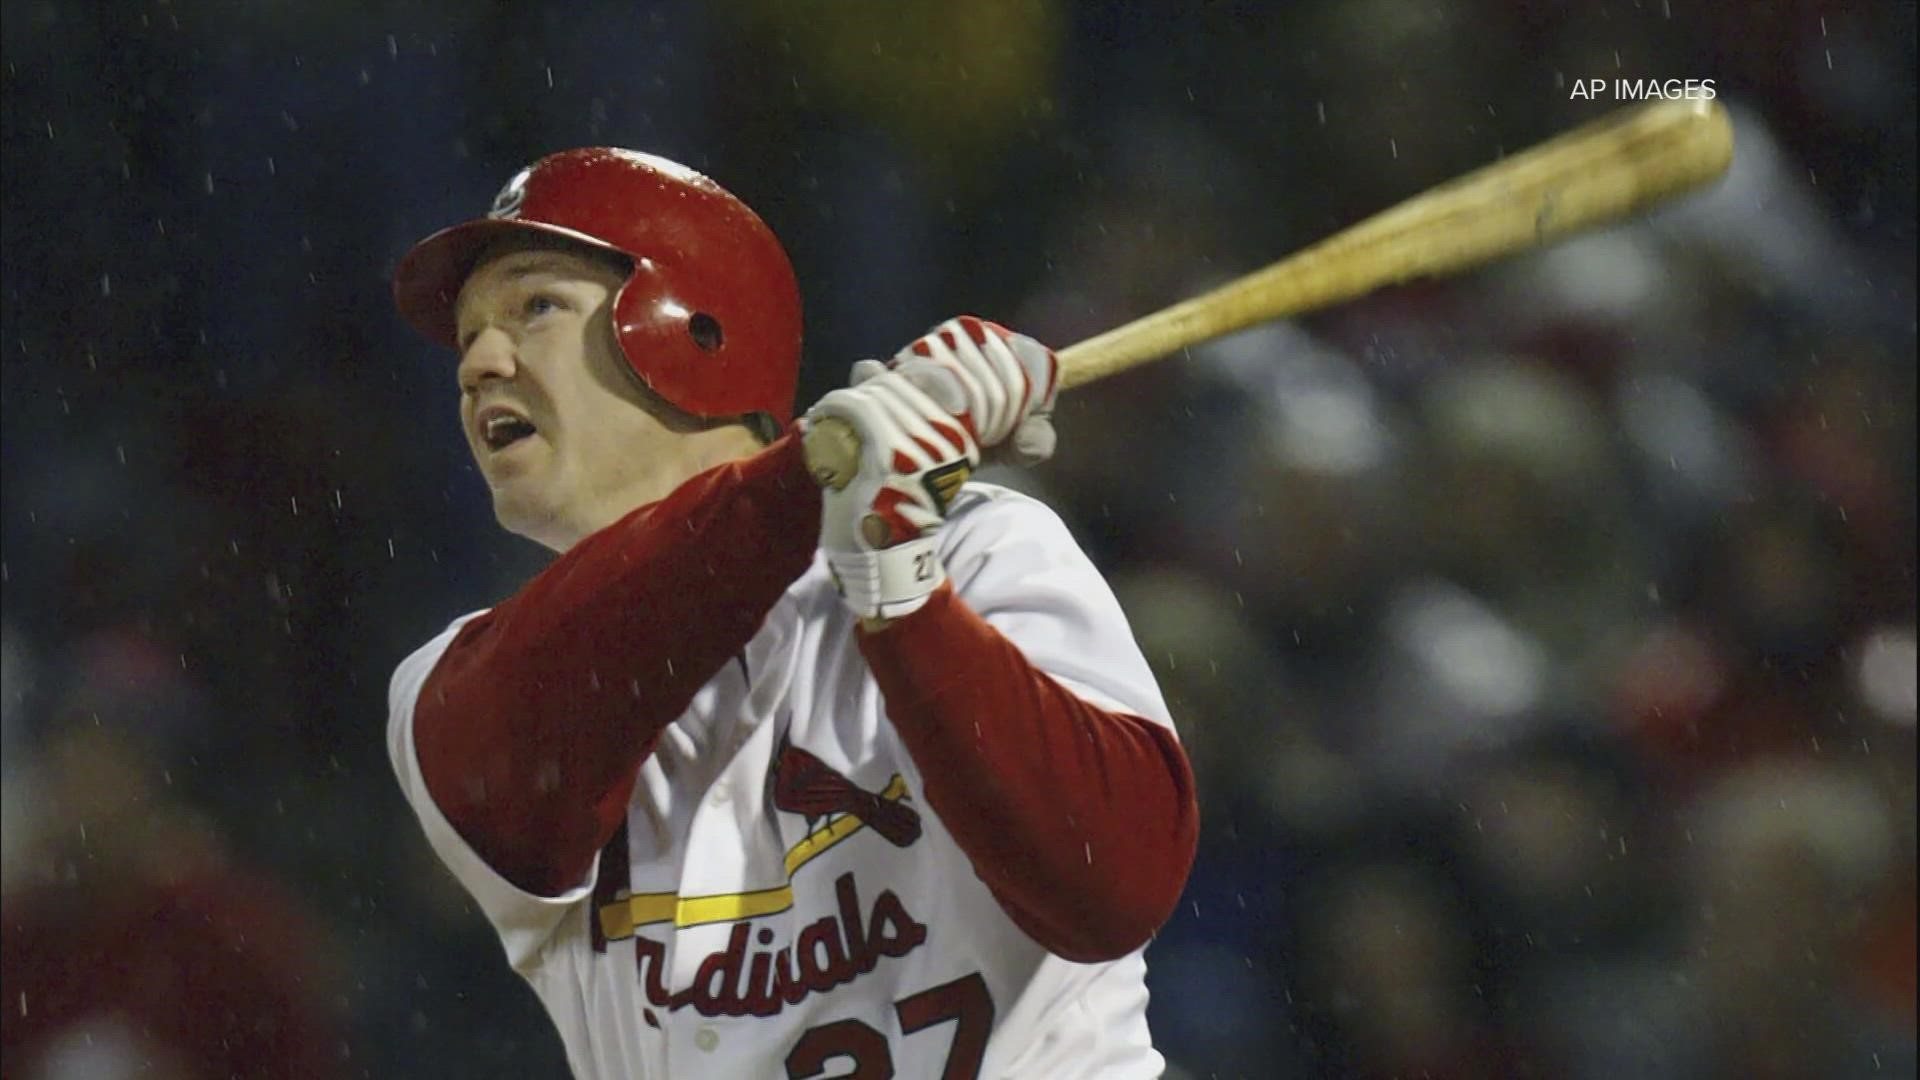 Rolen is a Hall of Famer, getting 76.3% of the vote. He was elected by just a five-vote margin.